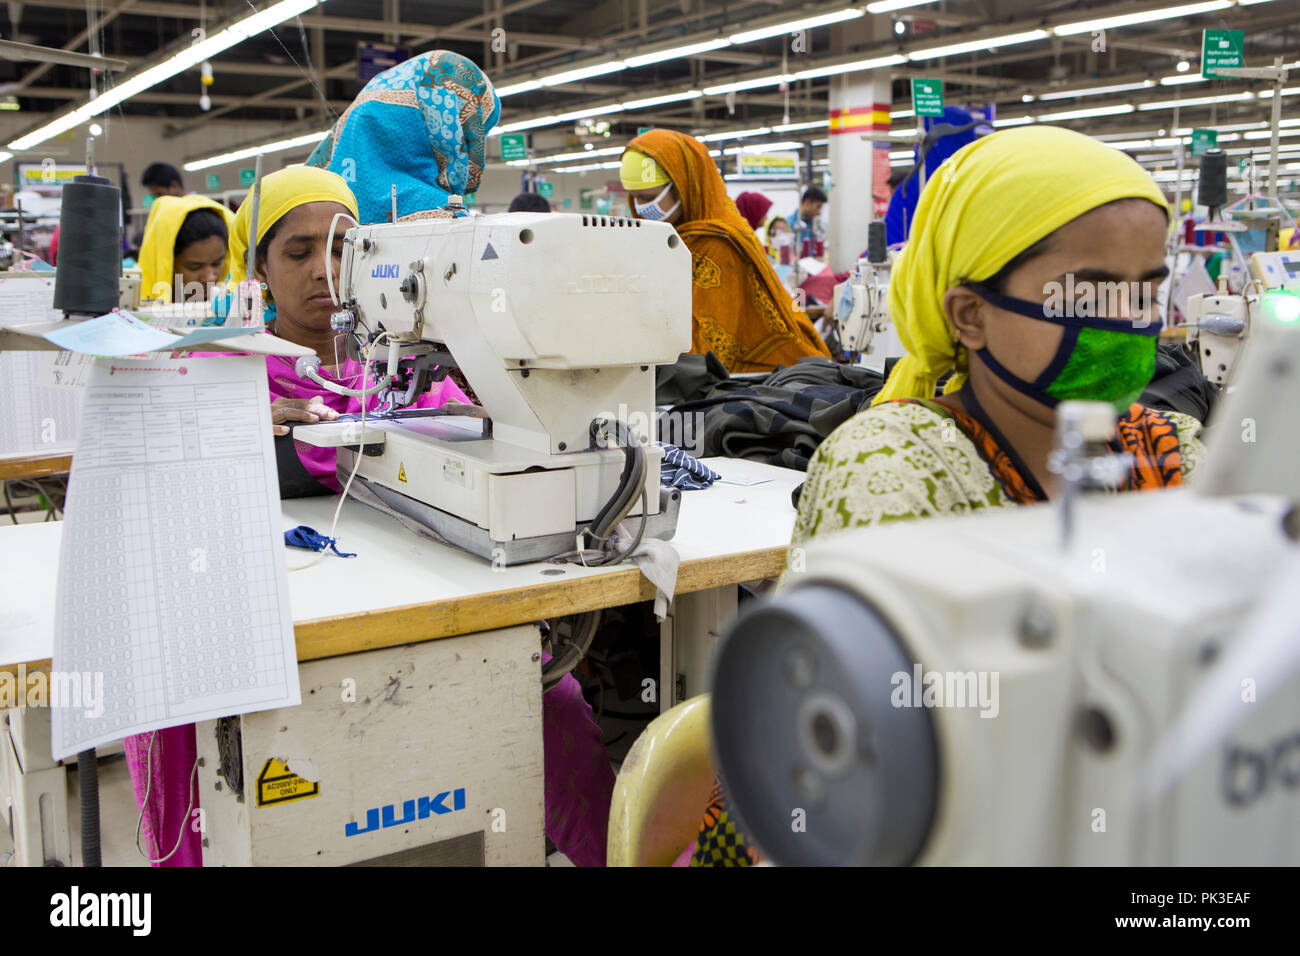 A garment worker at work on a sewing machine inside a garment factory in Bangladesh. Stock Photo